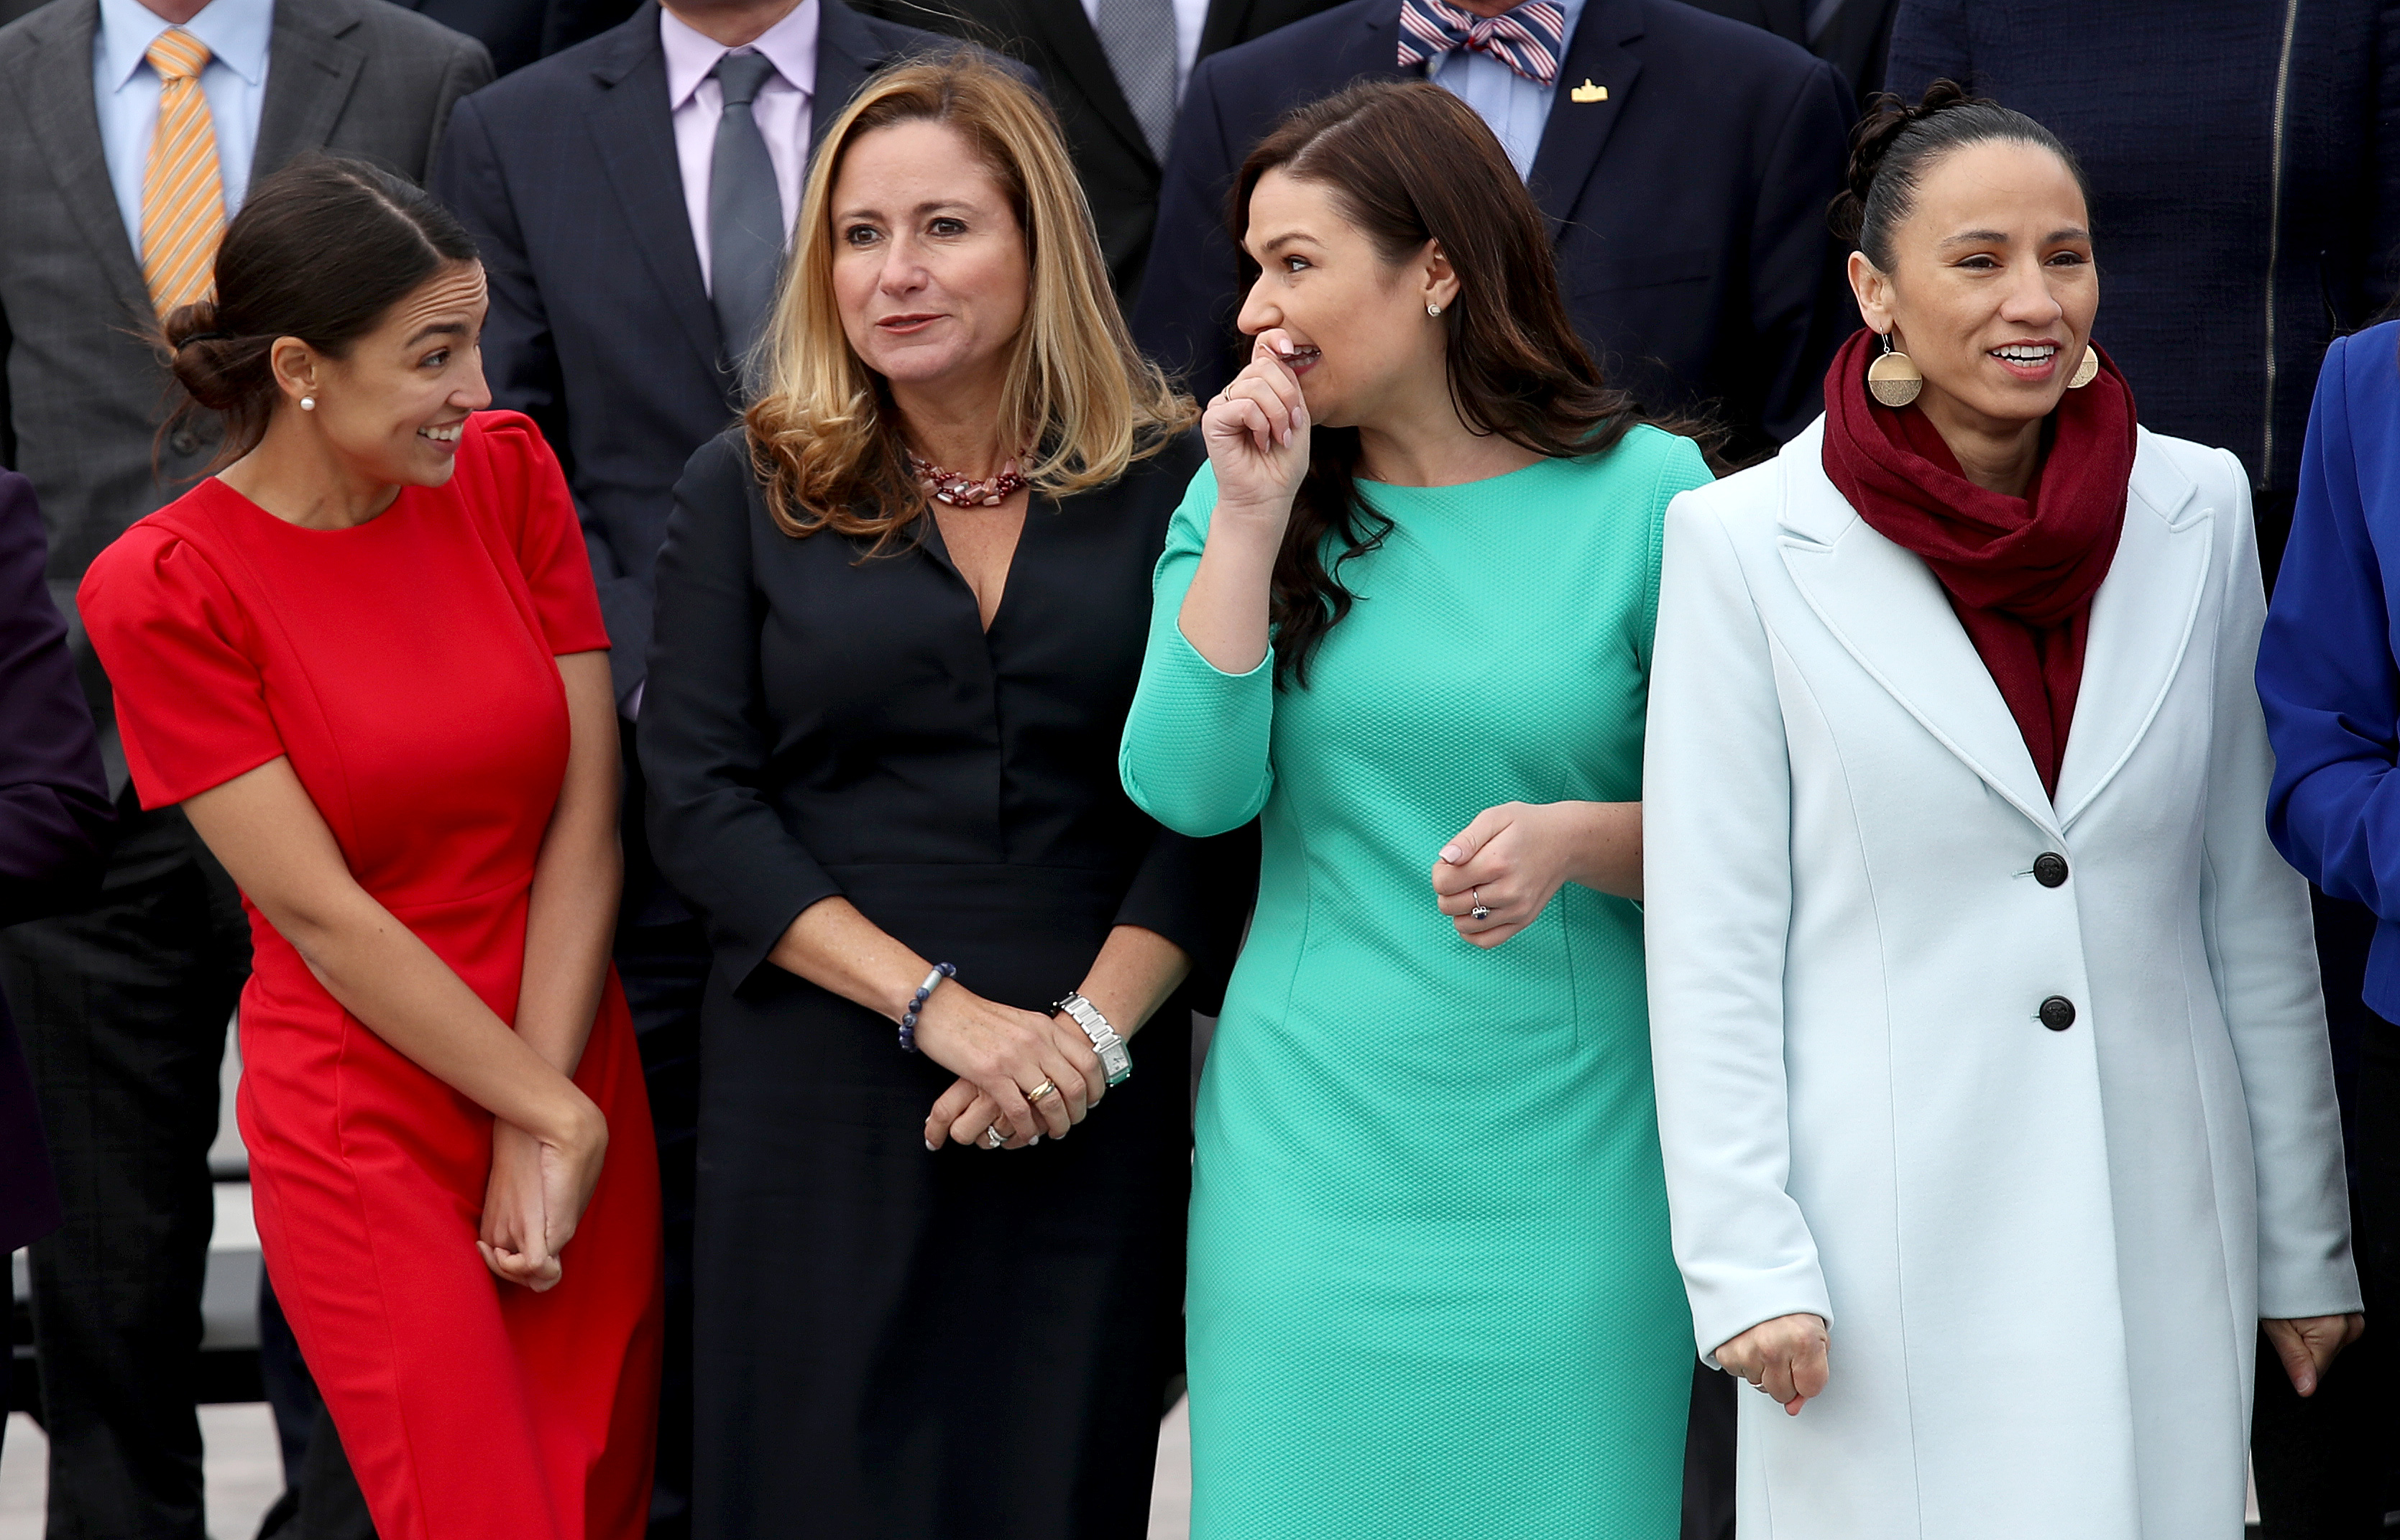 WASHINGTON, DC - NOVEMBER 14: (L-R) Representatives-elect Alexandria Ocasio-Cortez (D-NY), Debbie Mucarsel-Powell (D-FL) Abby Finkenauer (D-IA), and Sharice Davids (D-KS) join with other newly elected members of the House of Representatives for an official class photo of new House members at the U.S. Capitol on November 14, 2018 in Washington, DC. Newly elected members of the House are in Washington this week for orientation meetings. (Photo by Win McNamee/Getty Images)